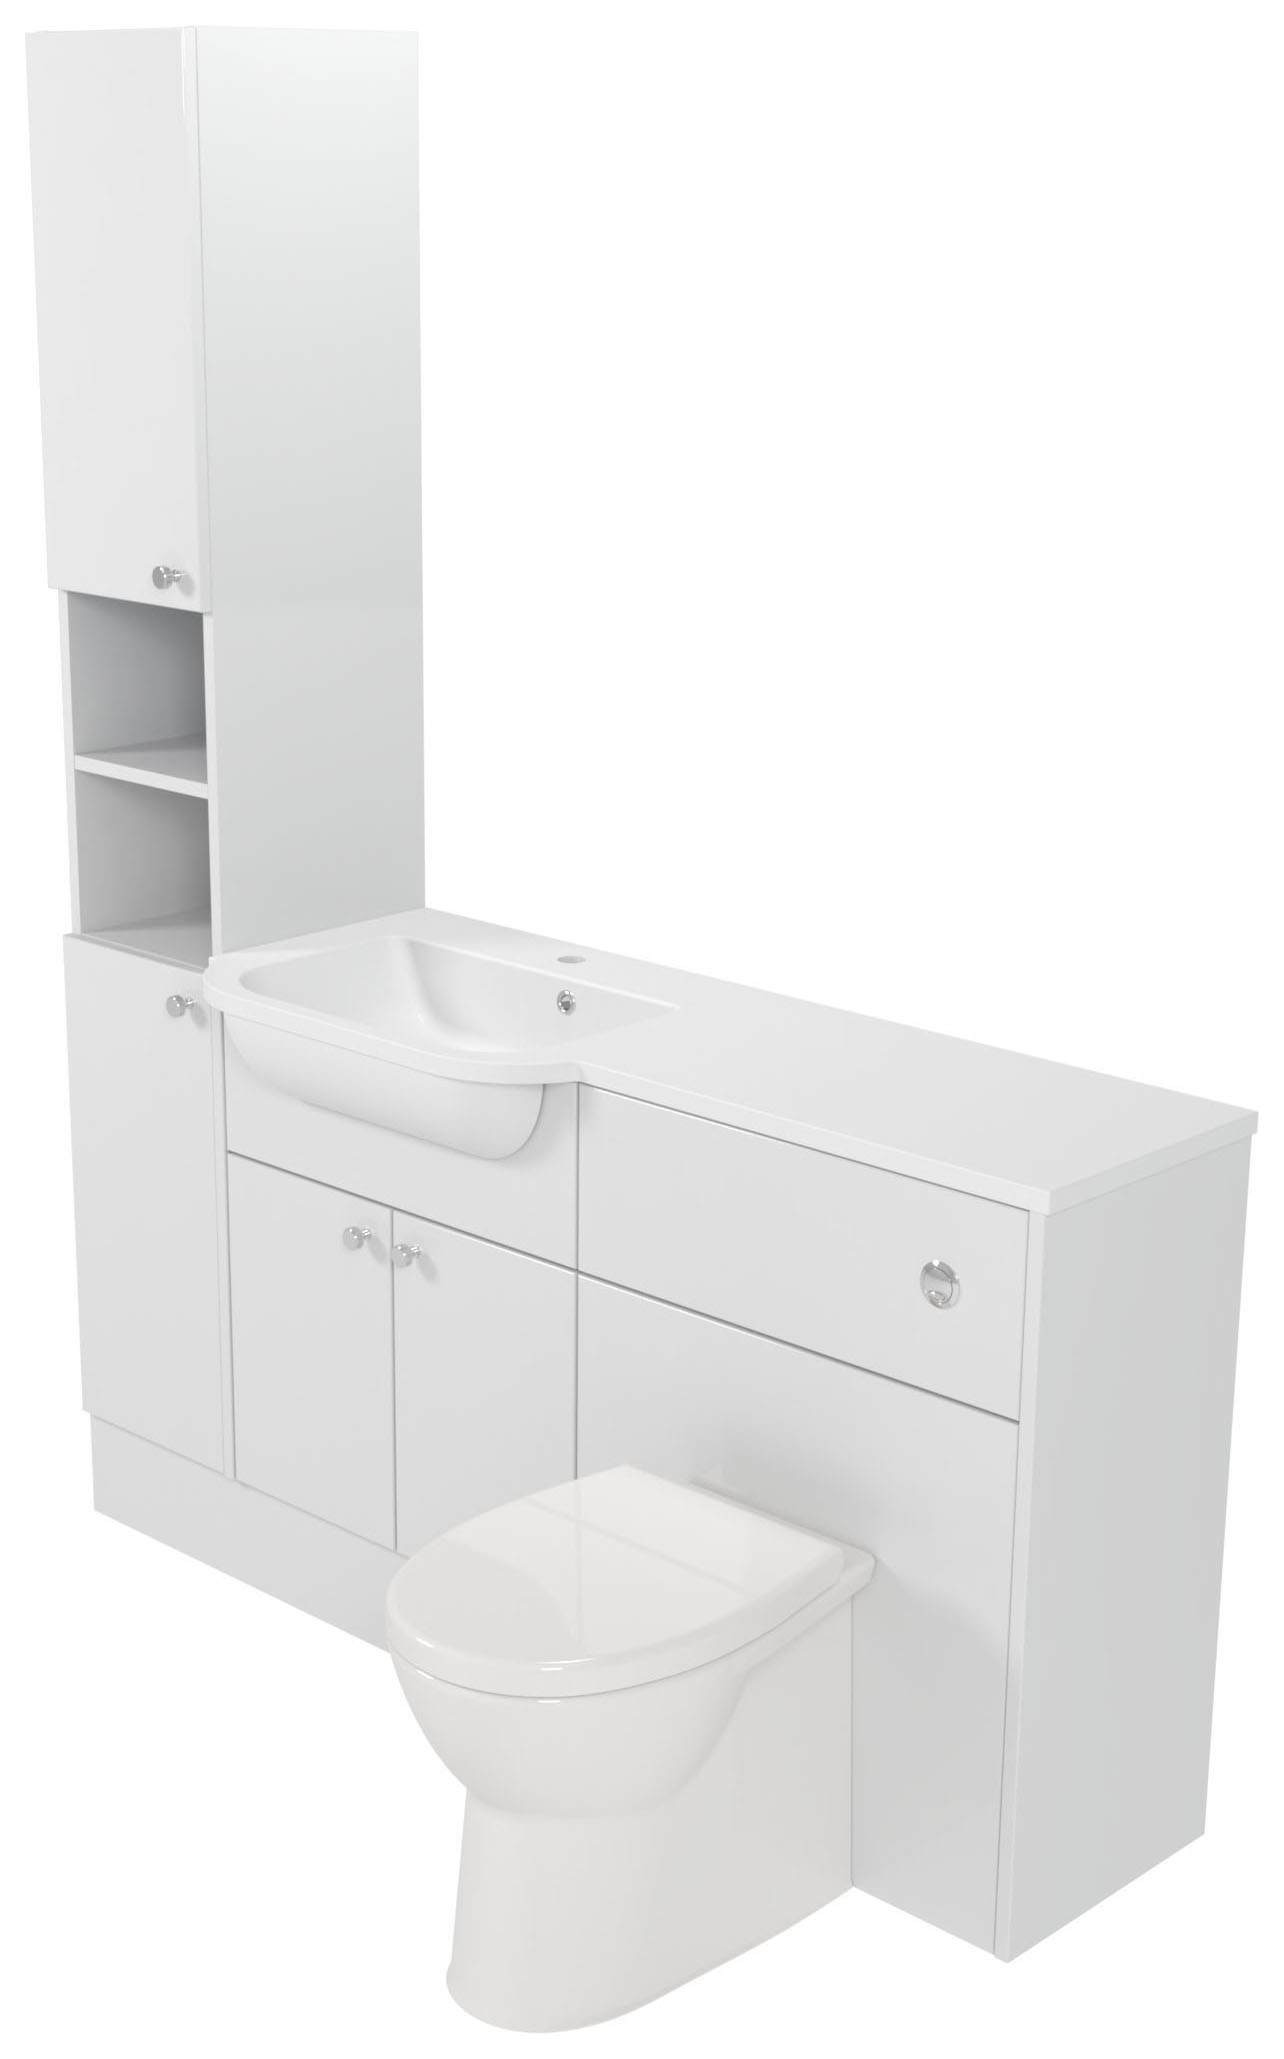 Deccado Benham Bright White 1500mm Fitted Tower, Vanity & Toilet Pan Unit Combination with Basin